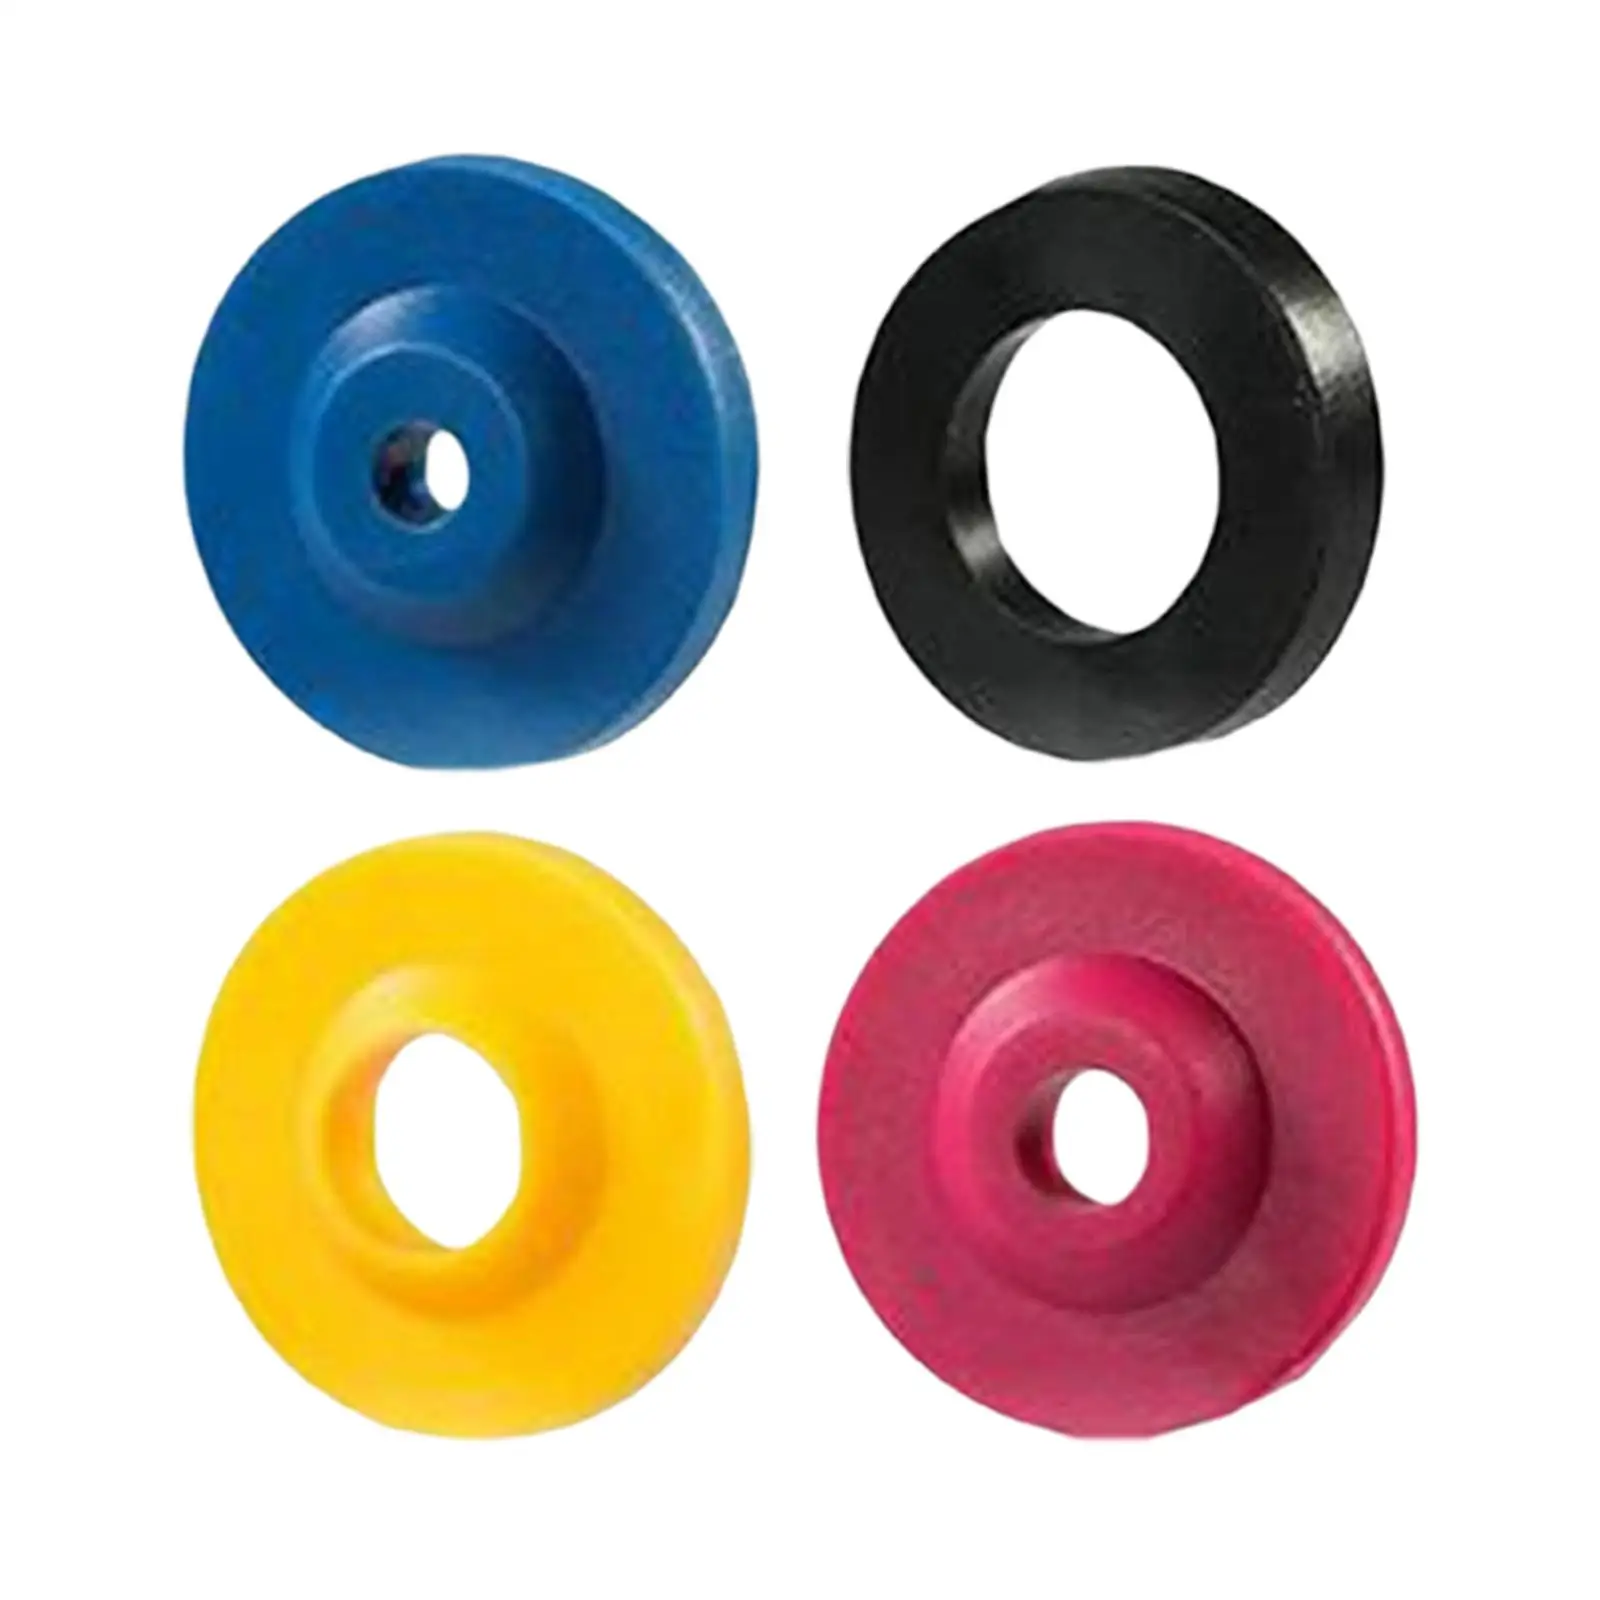 Flow Limiter Less Water Costs Rubber Washer Flow Restrictor Water Saving Gasket Pack 5L/7L/11L 1/2 inch for Shower Hose